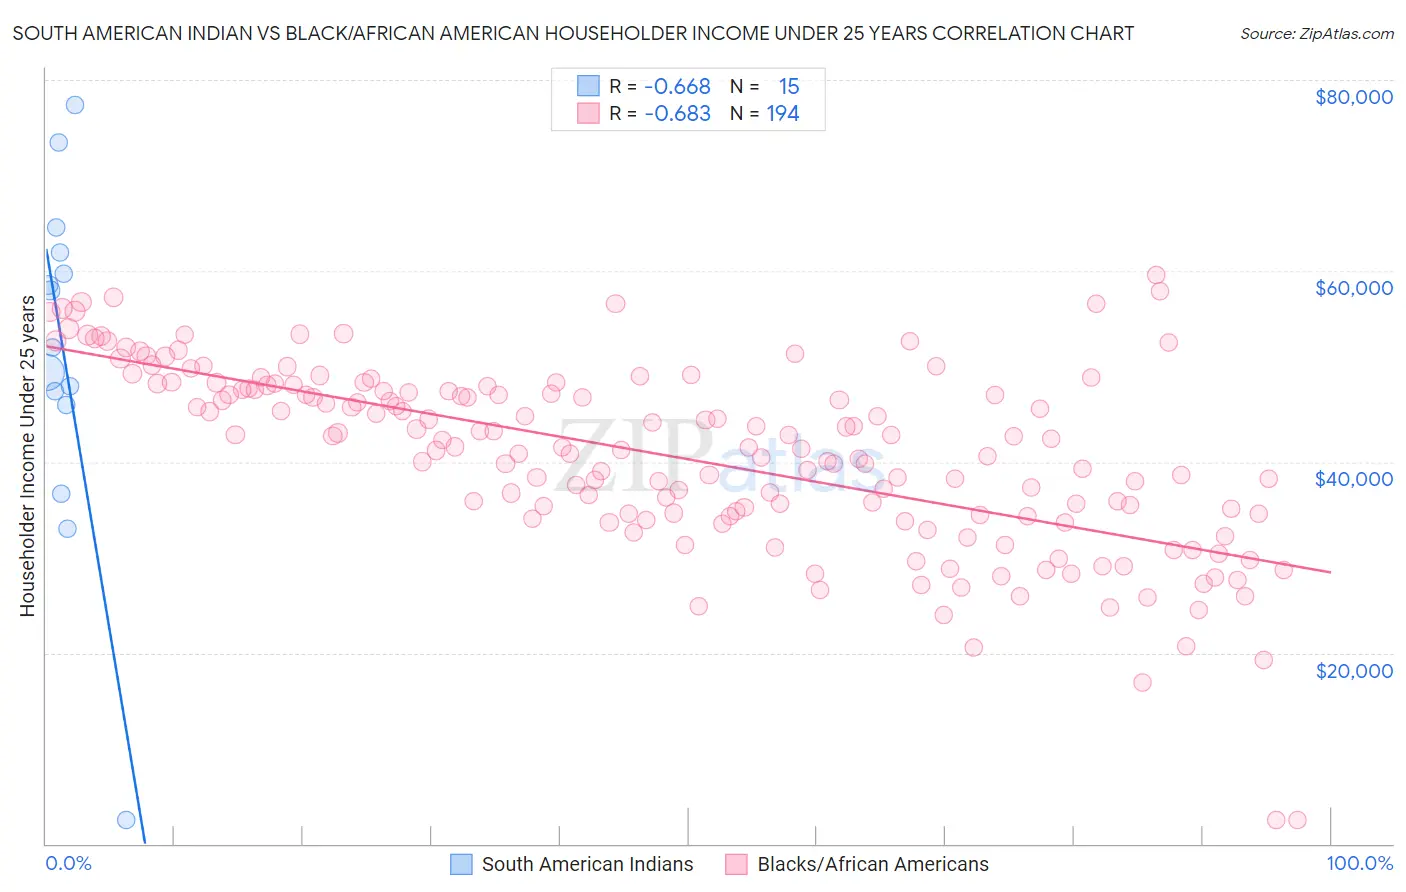 South American Indian vs Black/African American Householder Income Under 25 years